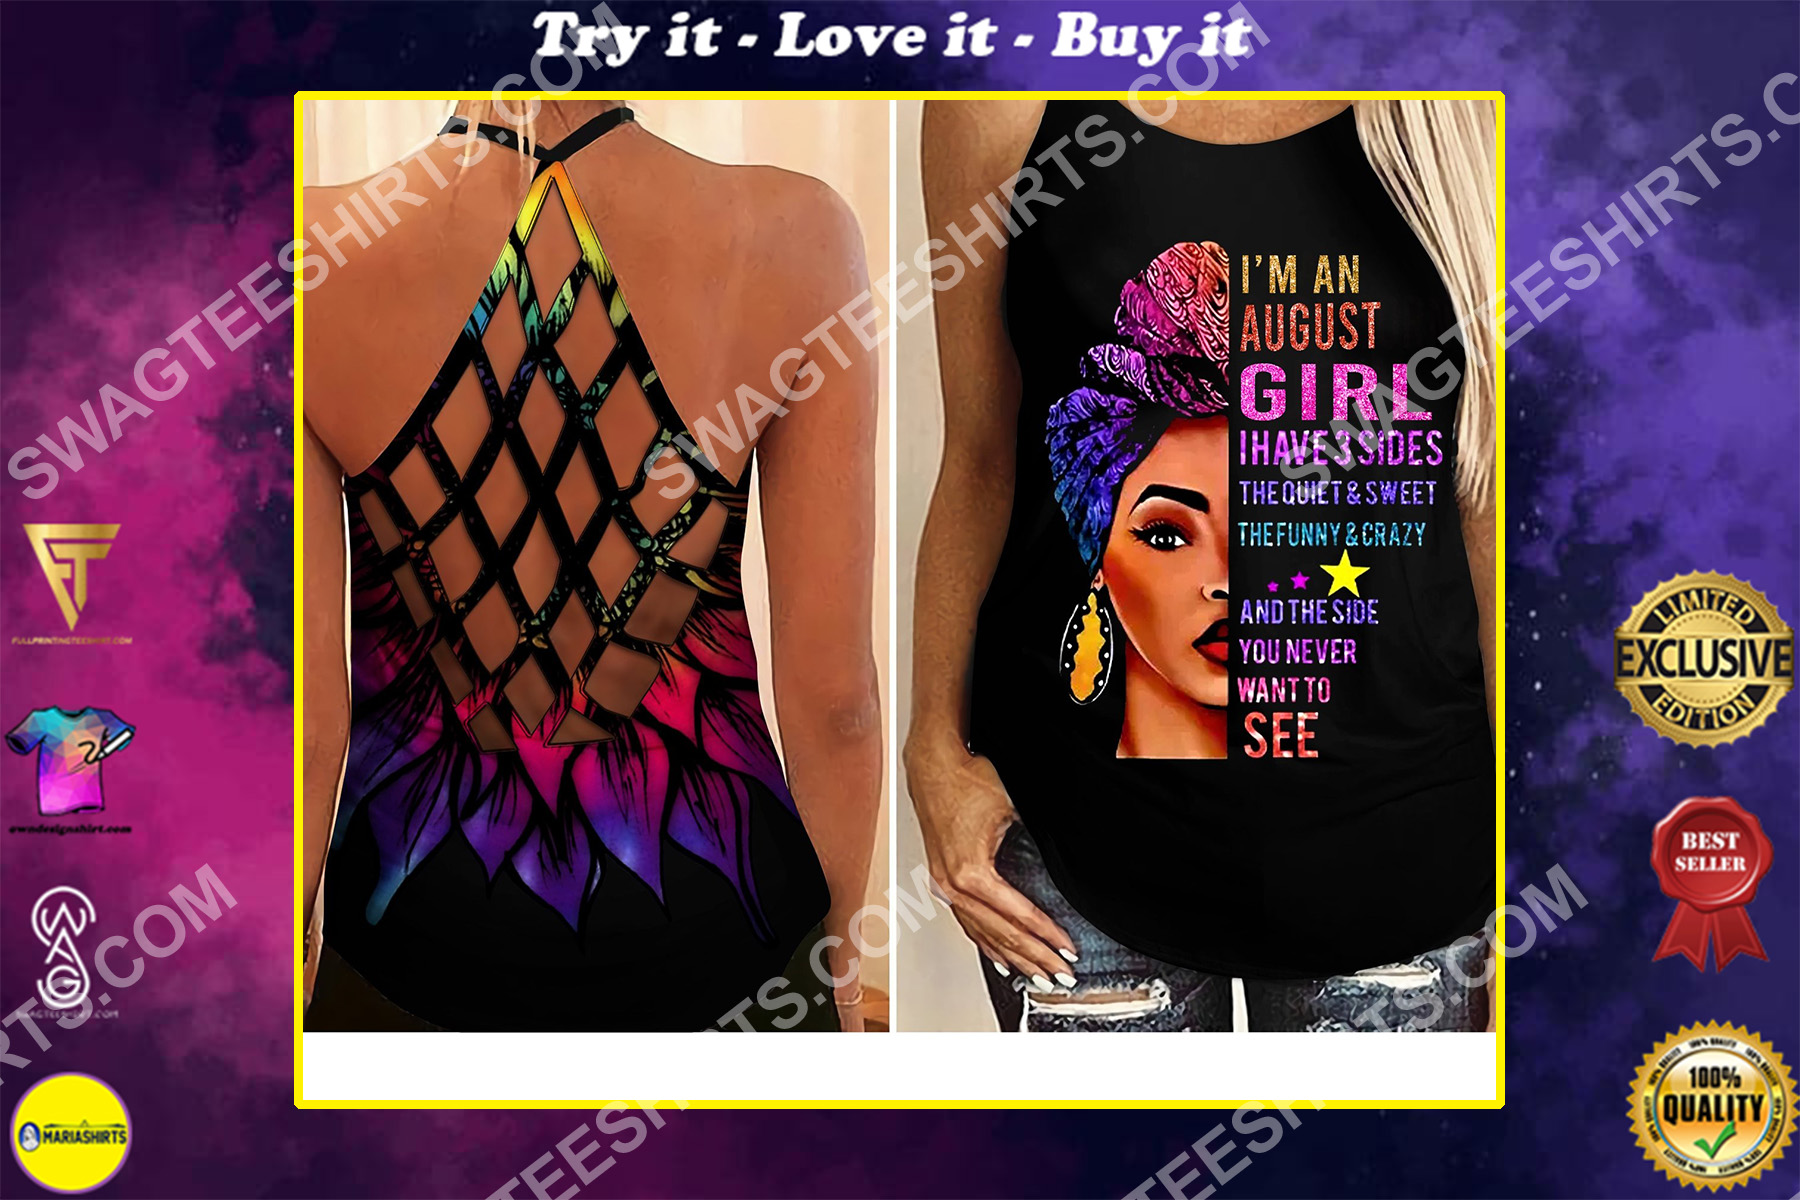 i'm an august girl i have 3 sides the quiet and sweet all over printed criss-cross tank top